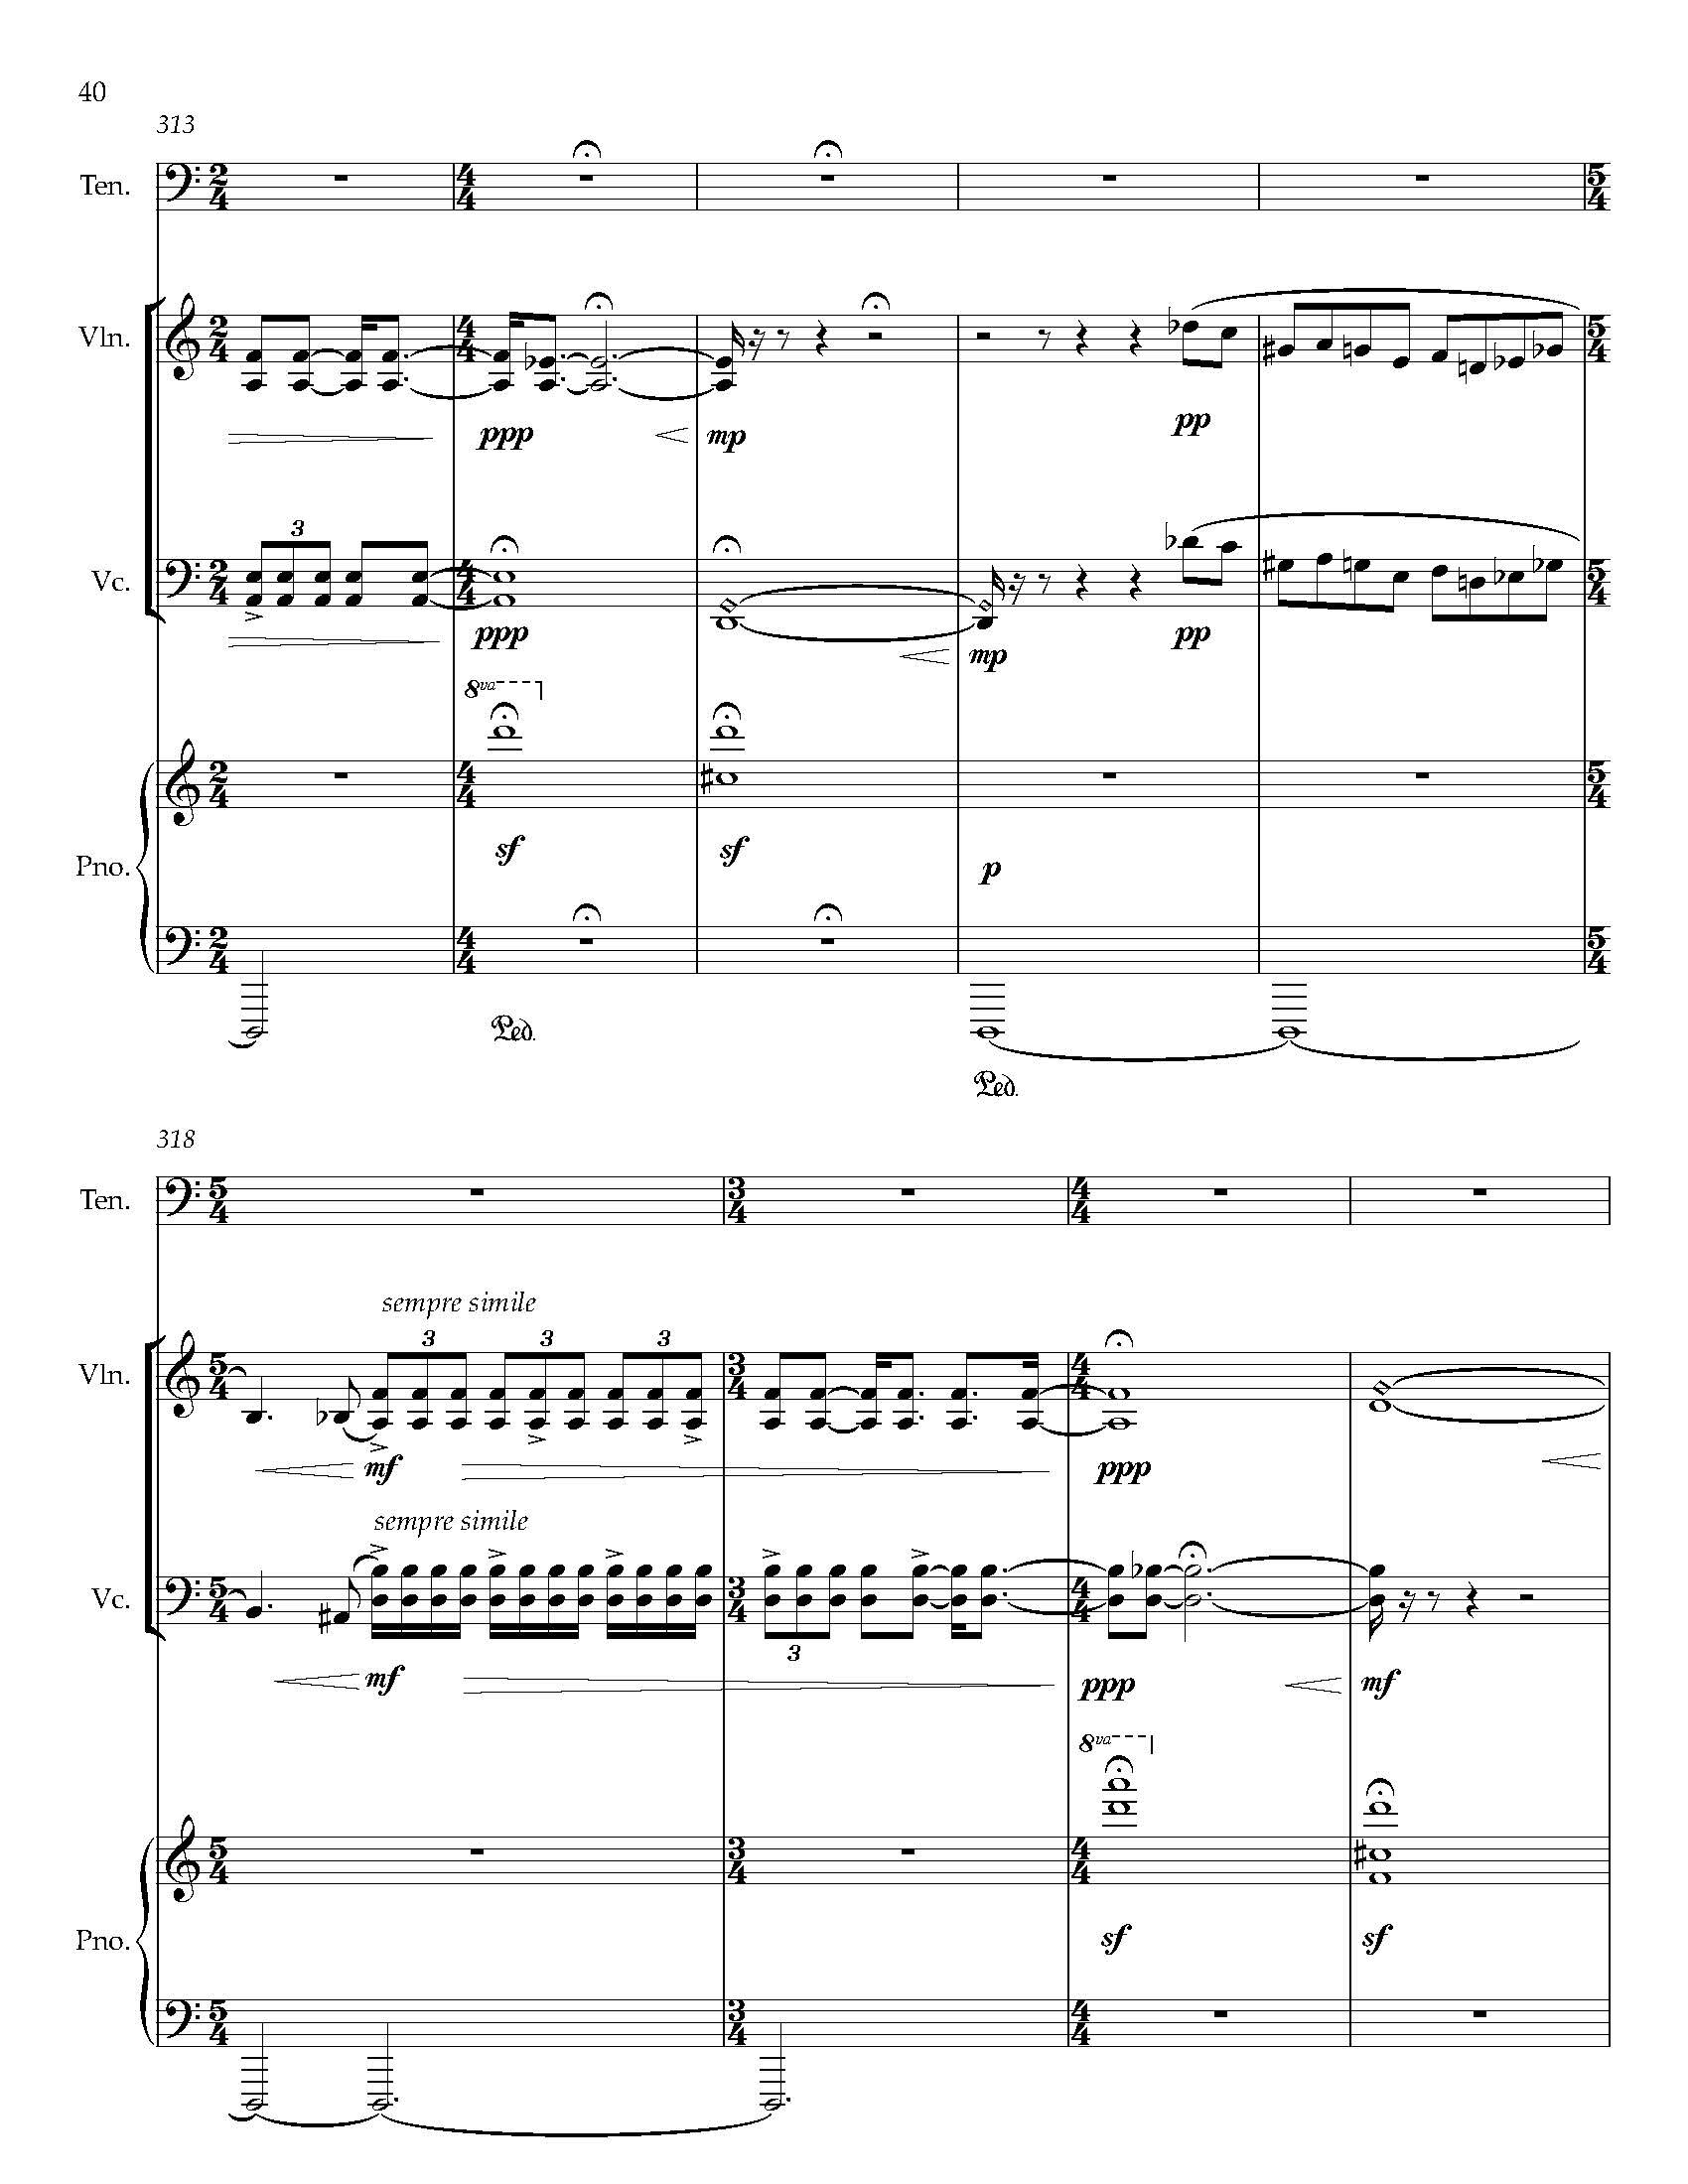 Gursky Songs - Complete Score_Page_48.jpg